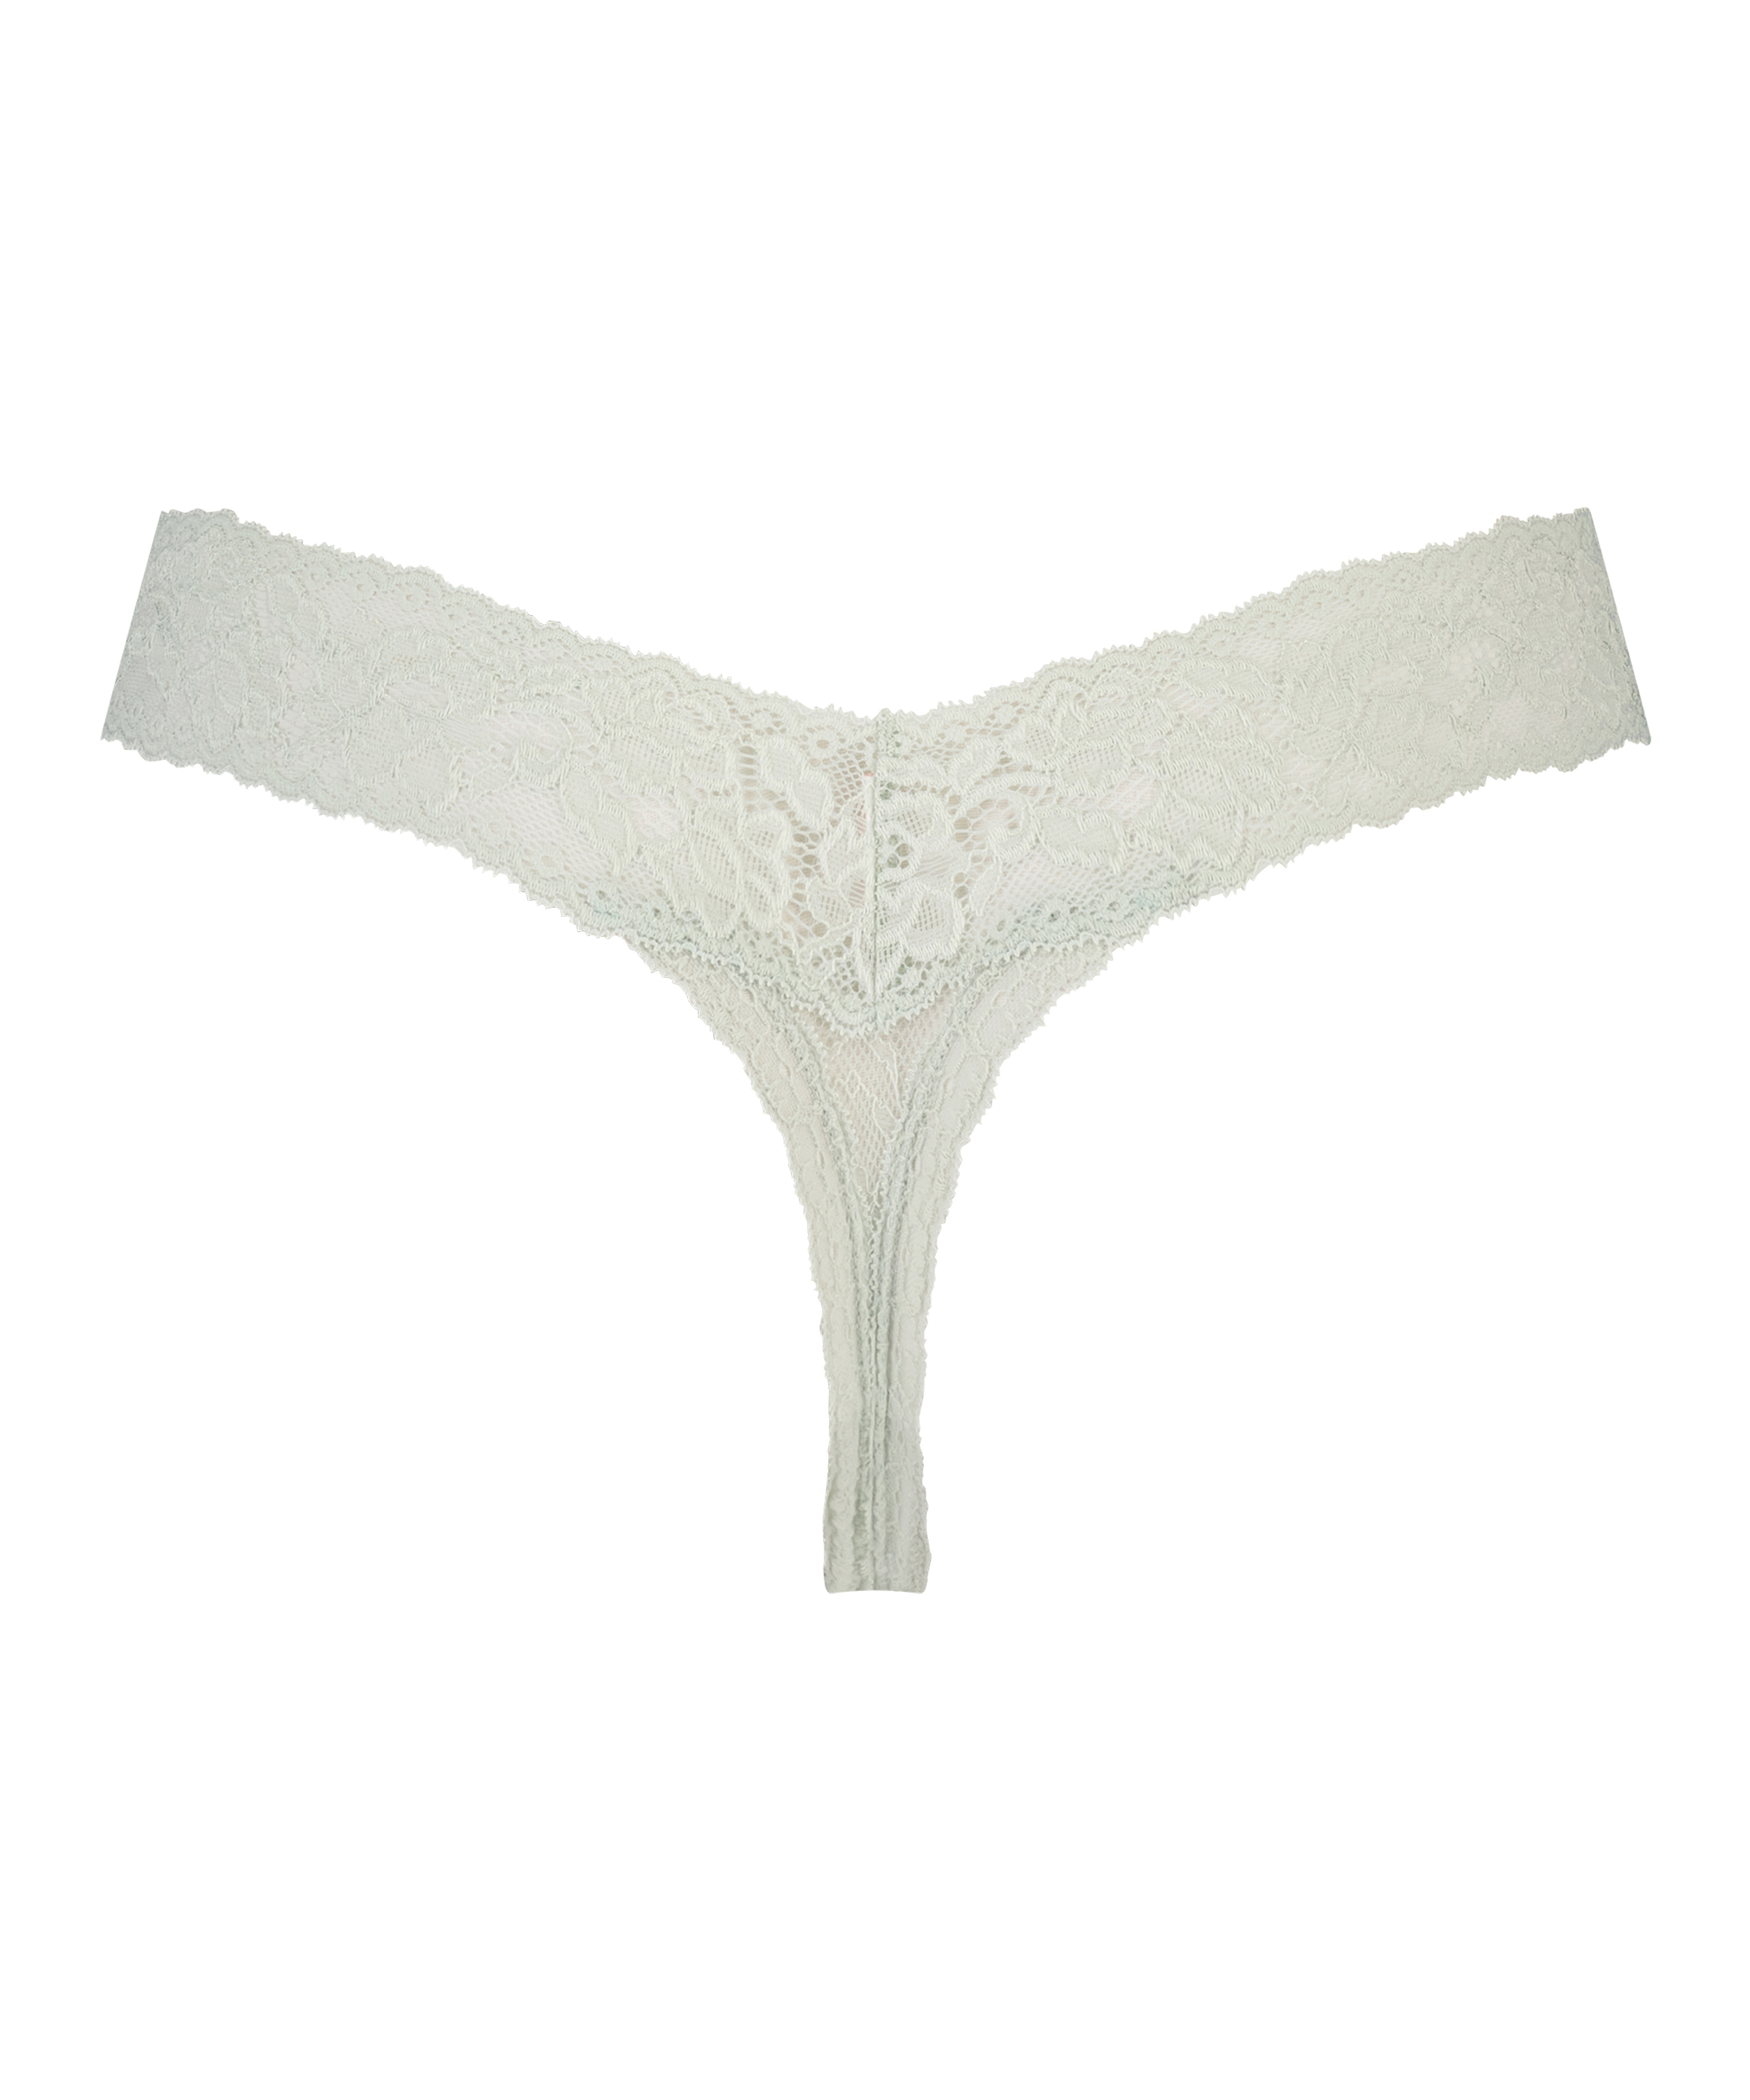 Madison Extra Low Thong, Beige, main